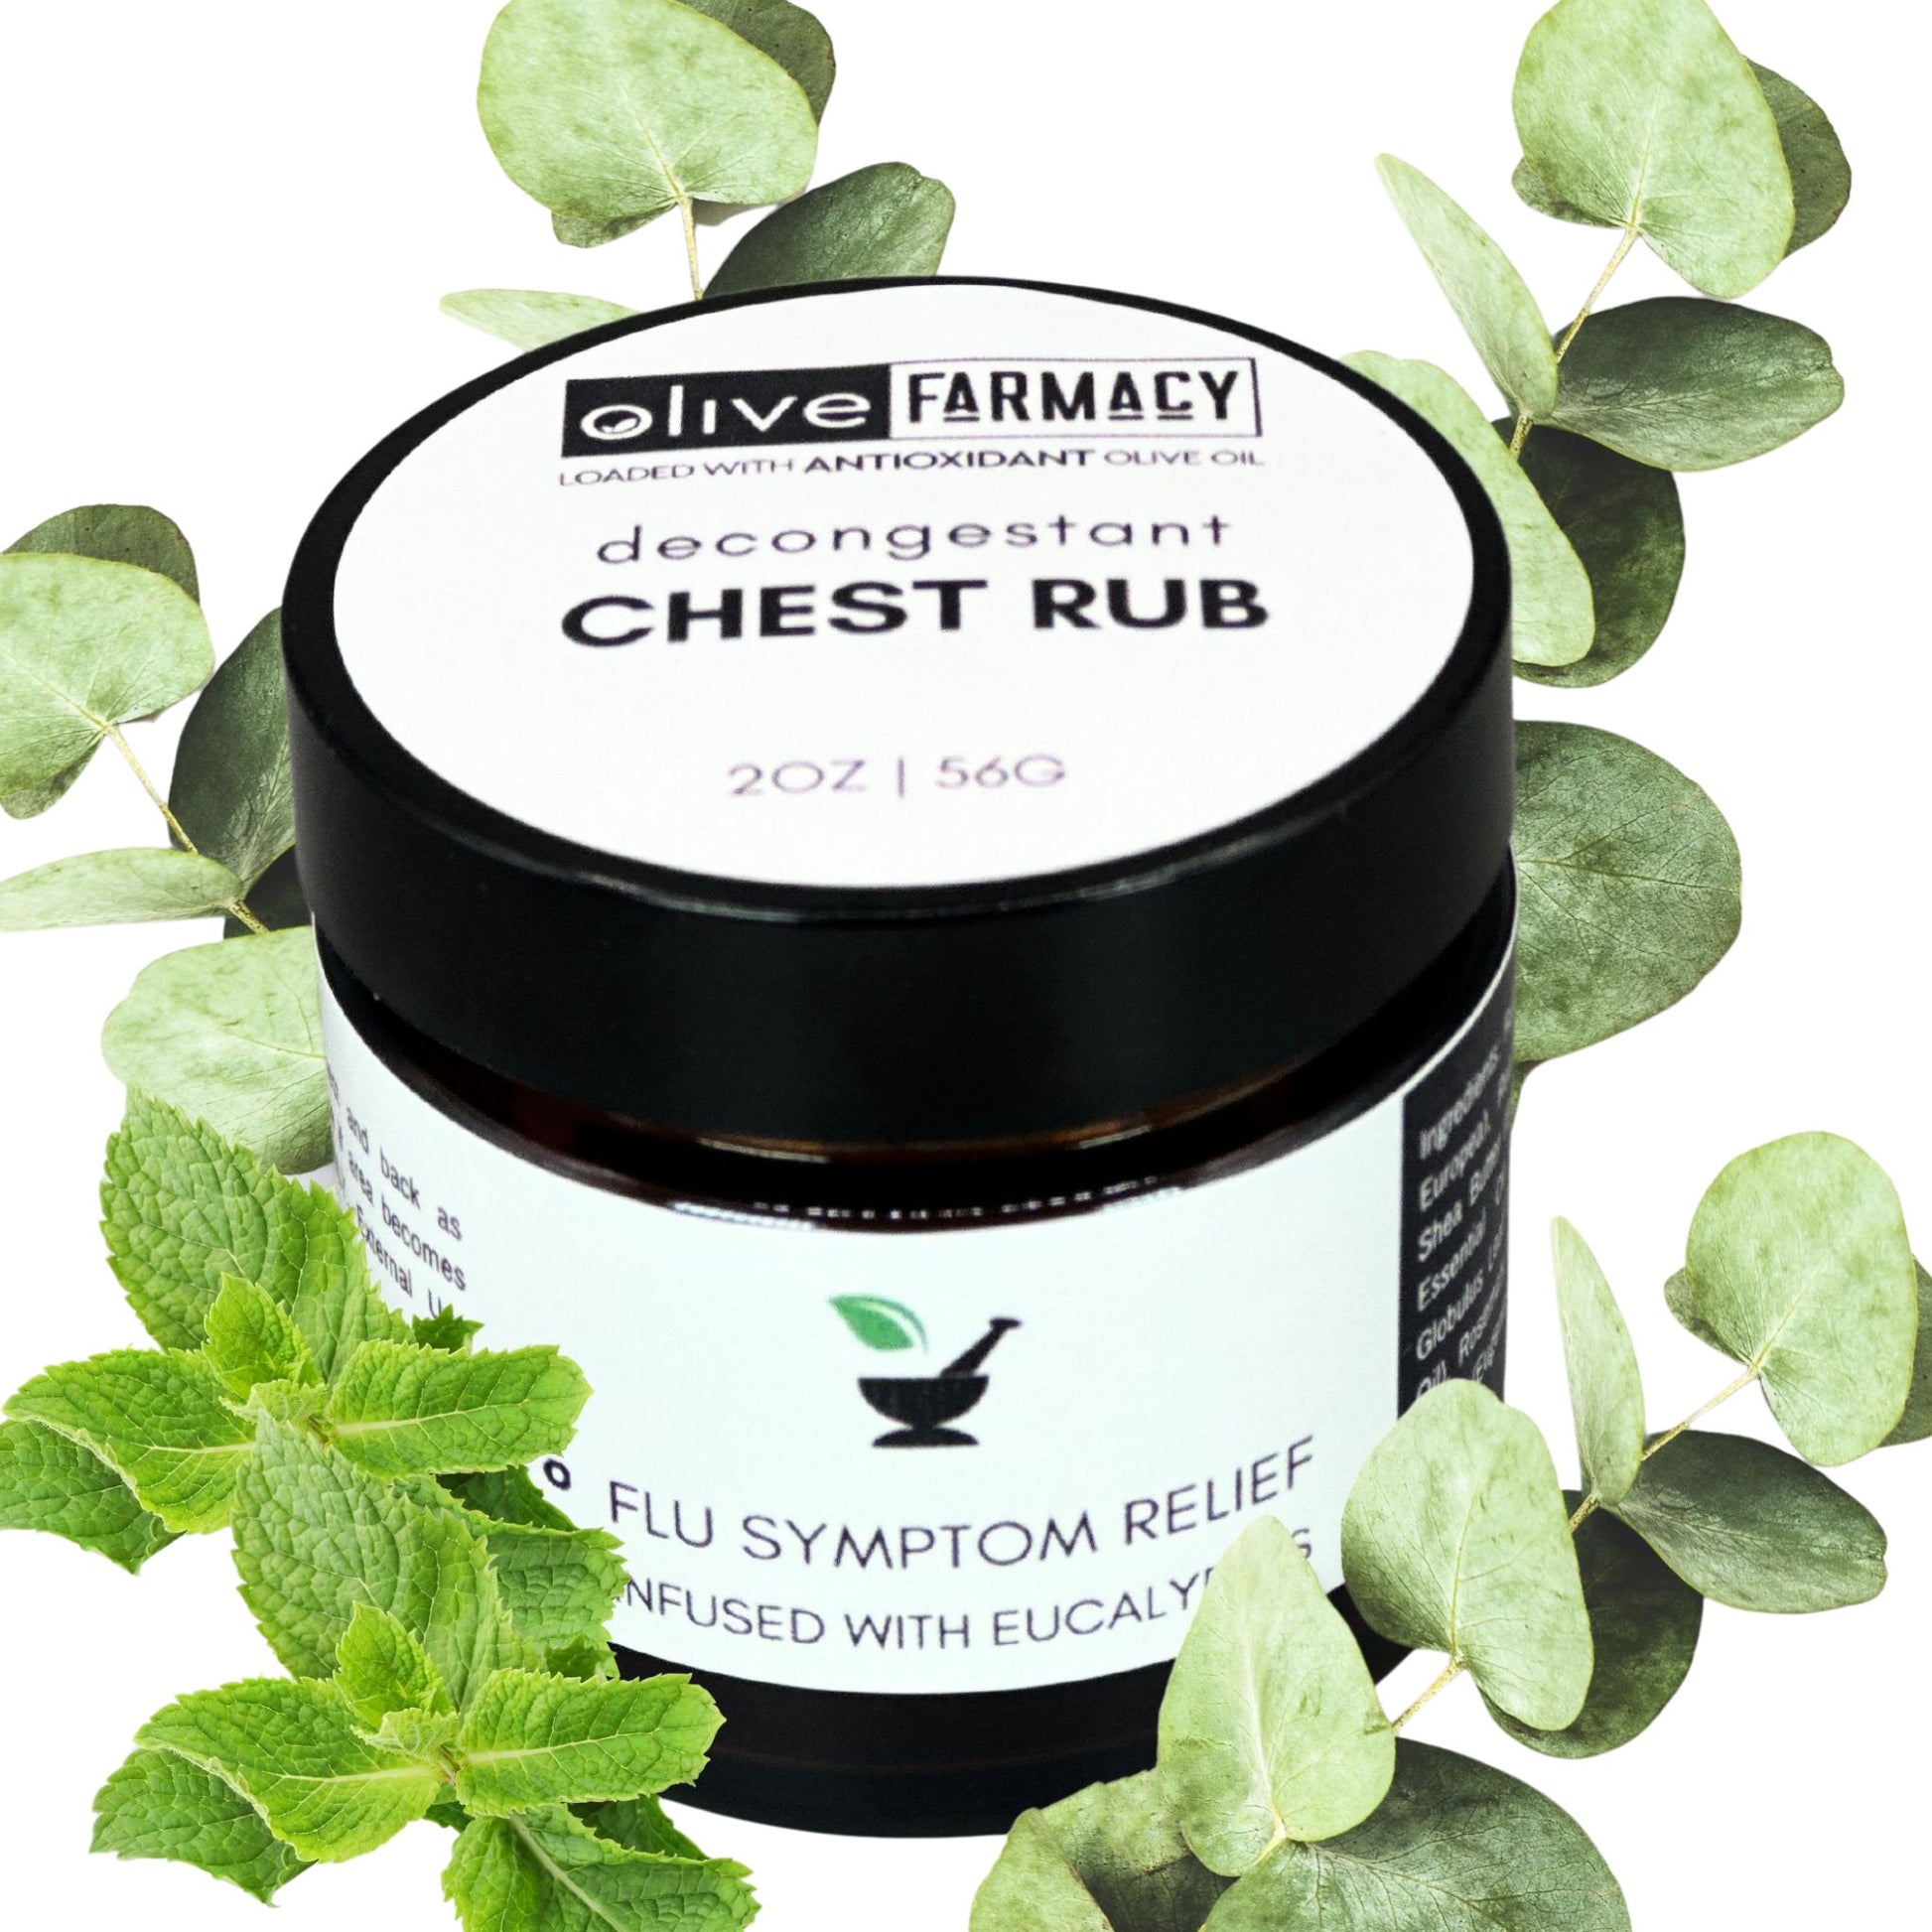 Natural Chest Rub for Coughs and Colds By Olive Farmacy